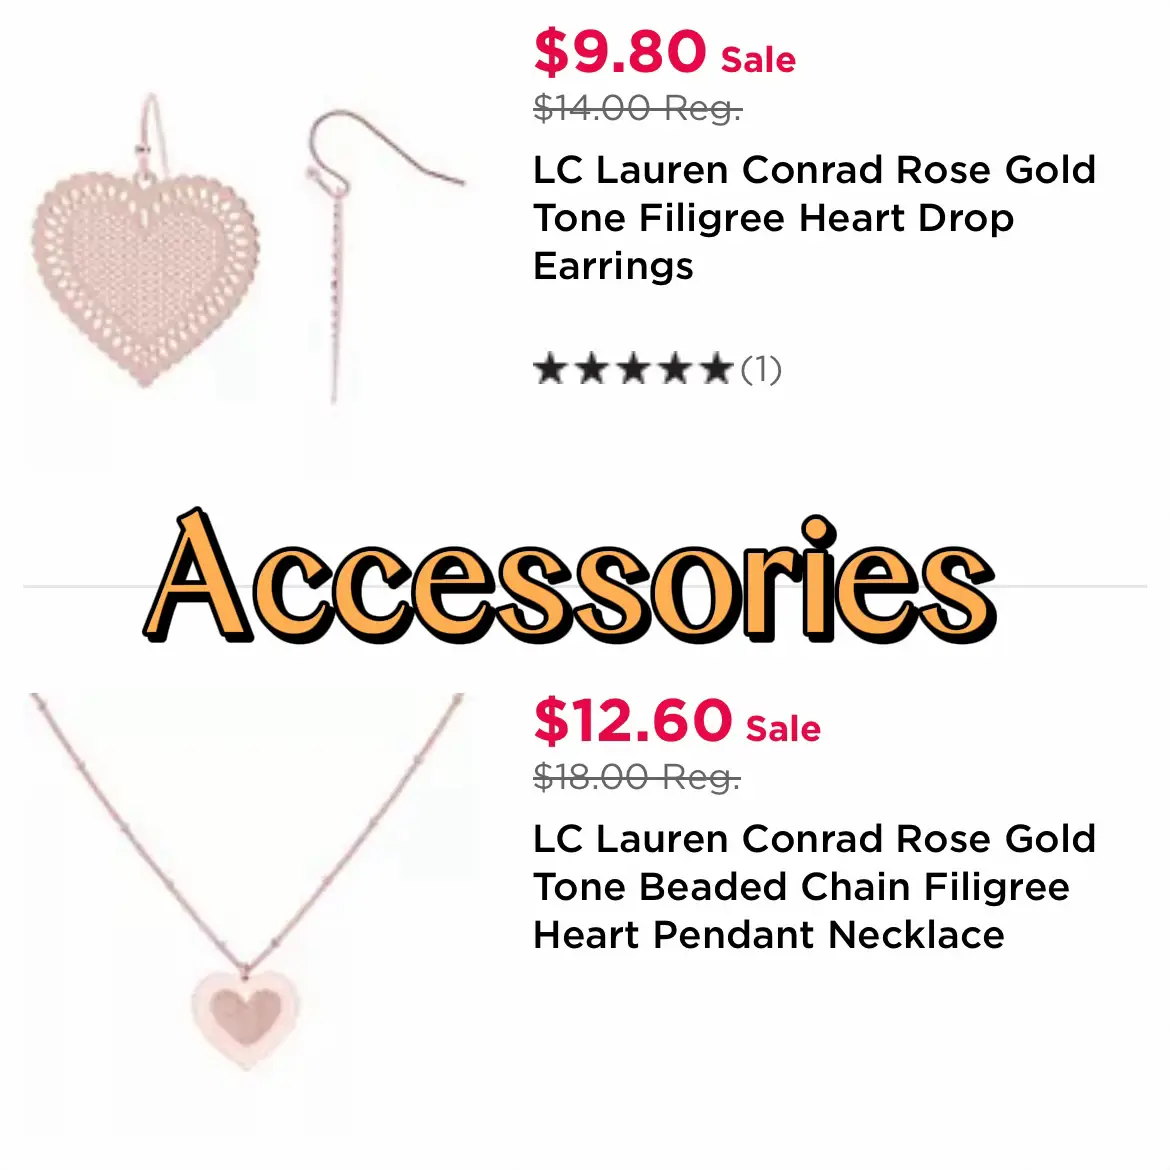 Lauren Conrad Beauty's last day for #ValentinesDay #sale